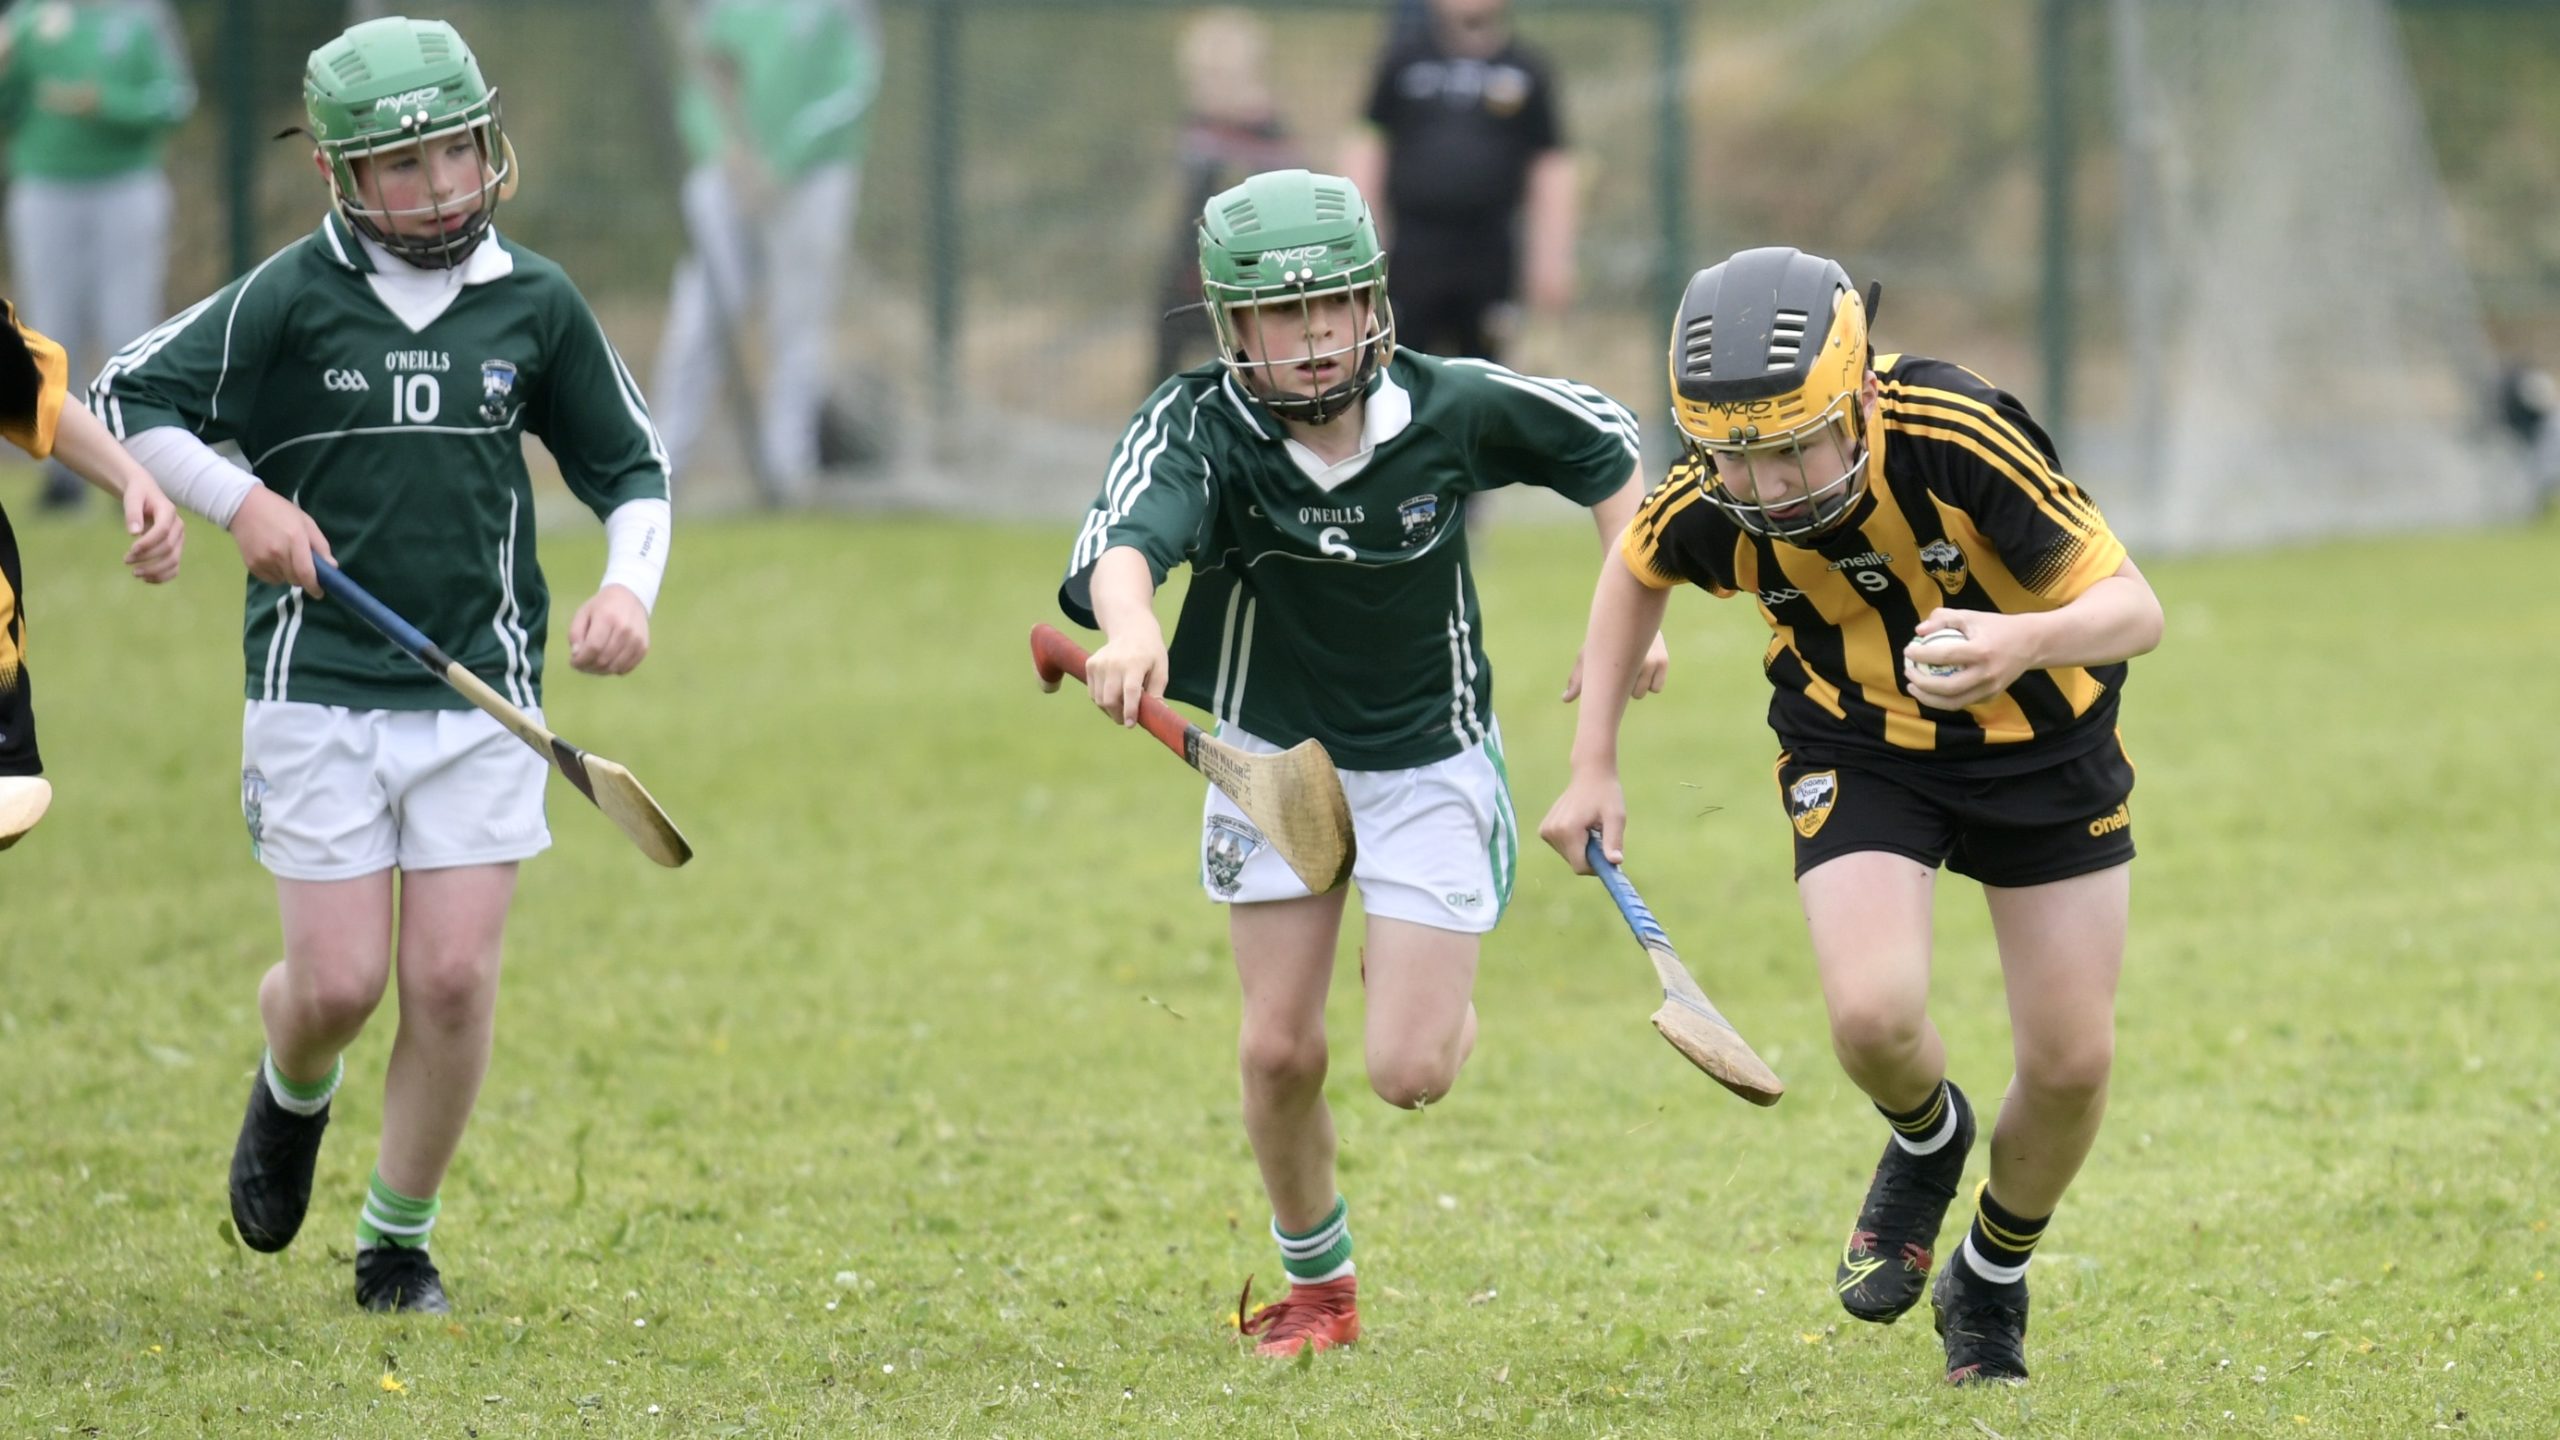 U11.5 Hurlers took a short run up to Ballygalget at the weekend